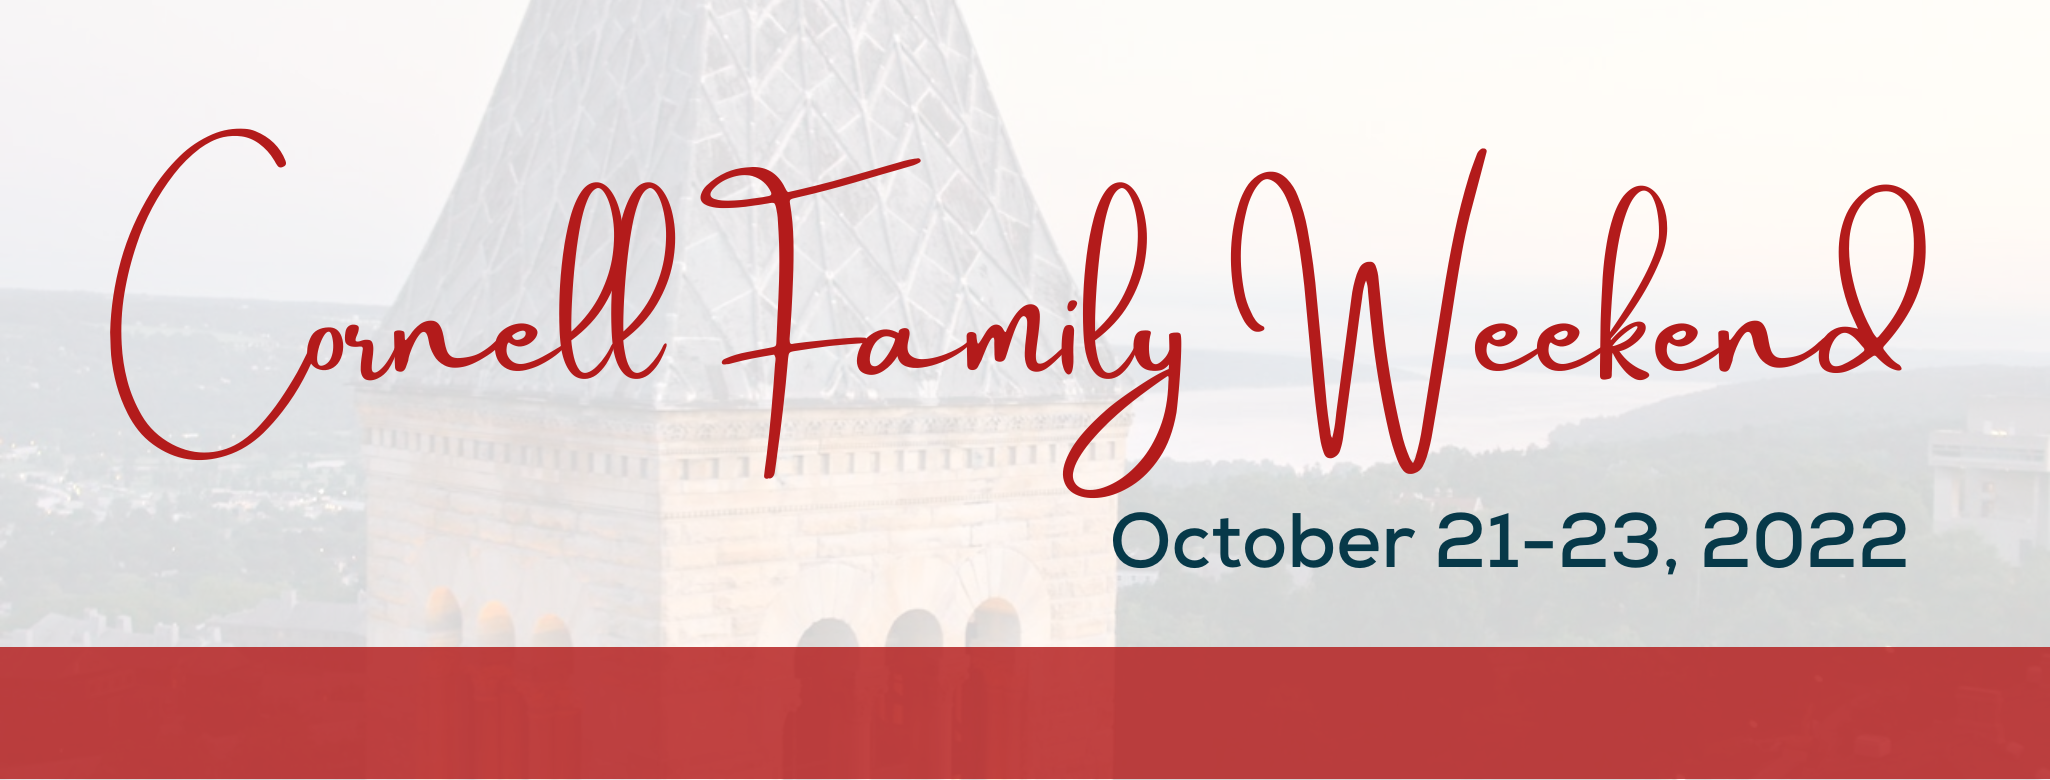 Family Weekend Student & Campus Life Cornell University